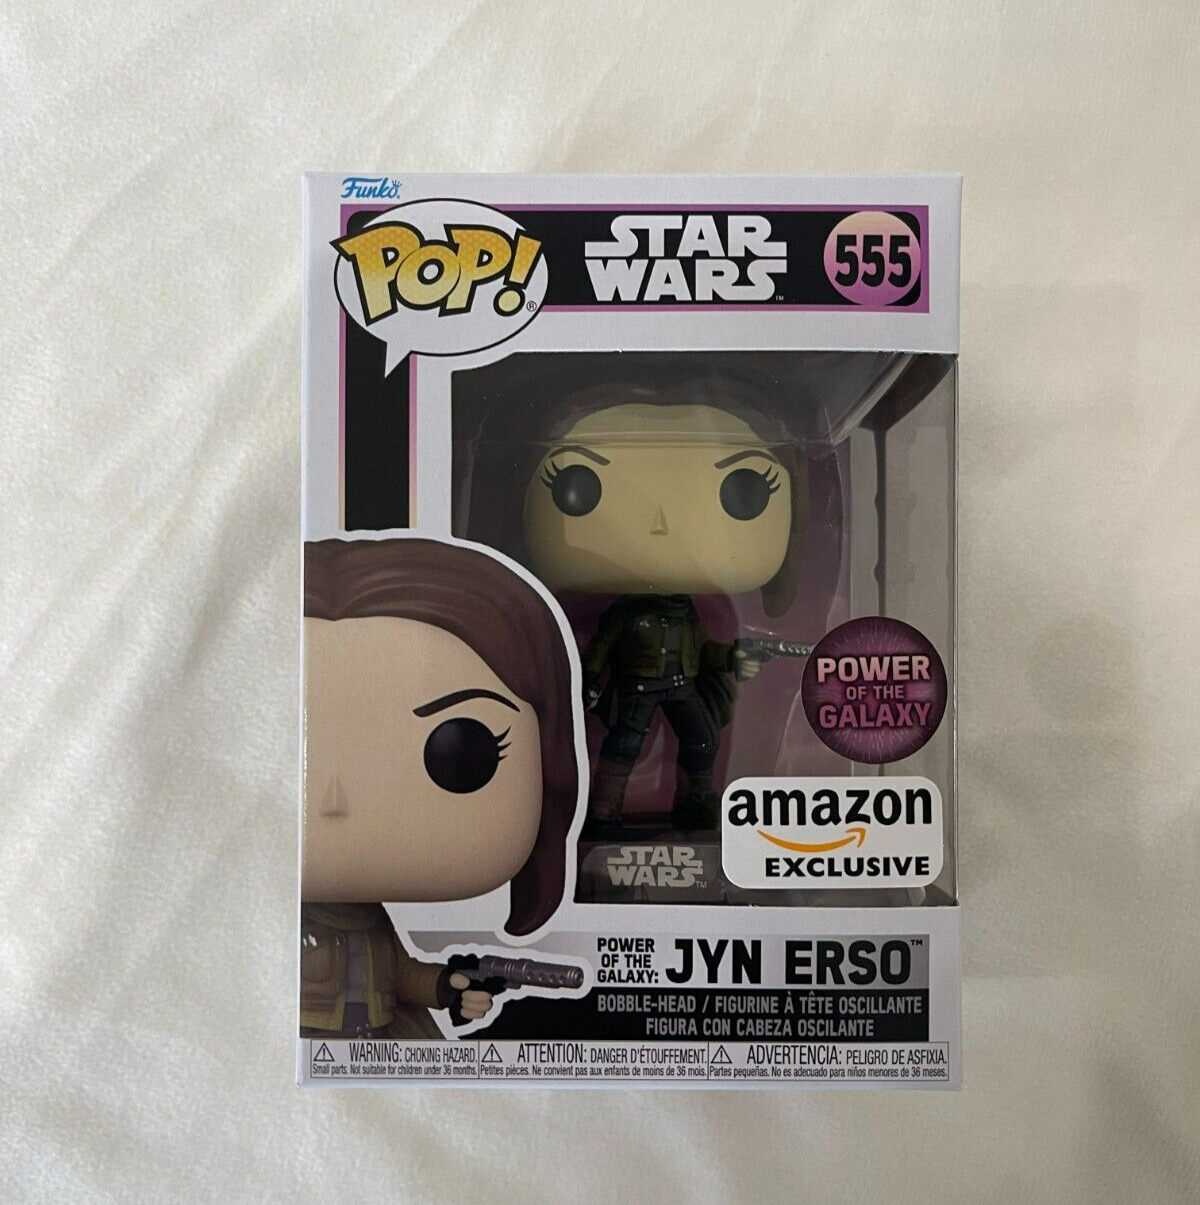 Funko Pop: Star Wars: Power of the Galaxy - Jyn Erso, Amazon Exclusive New